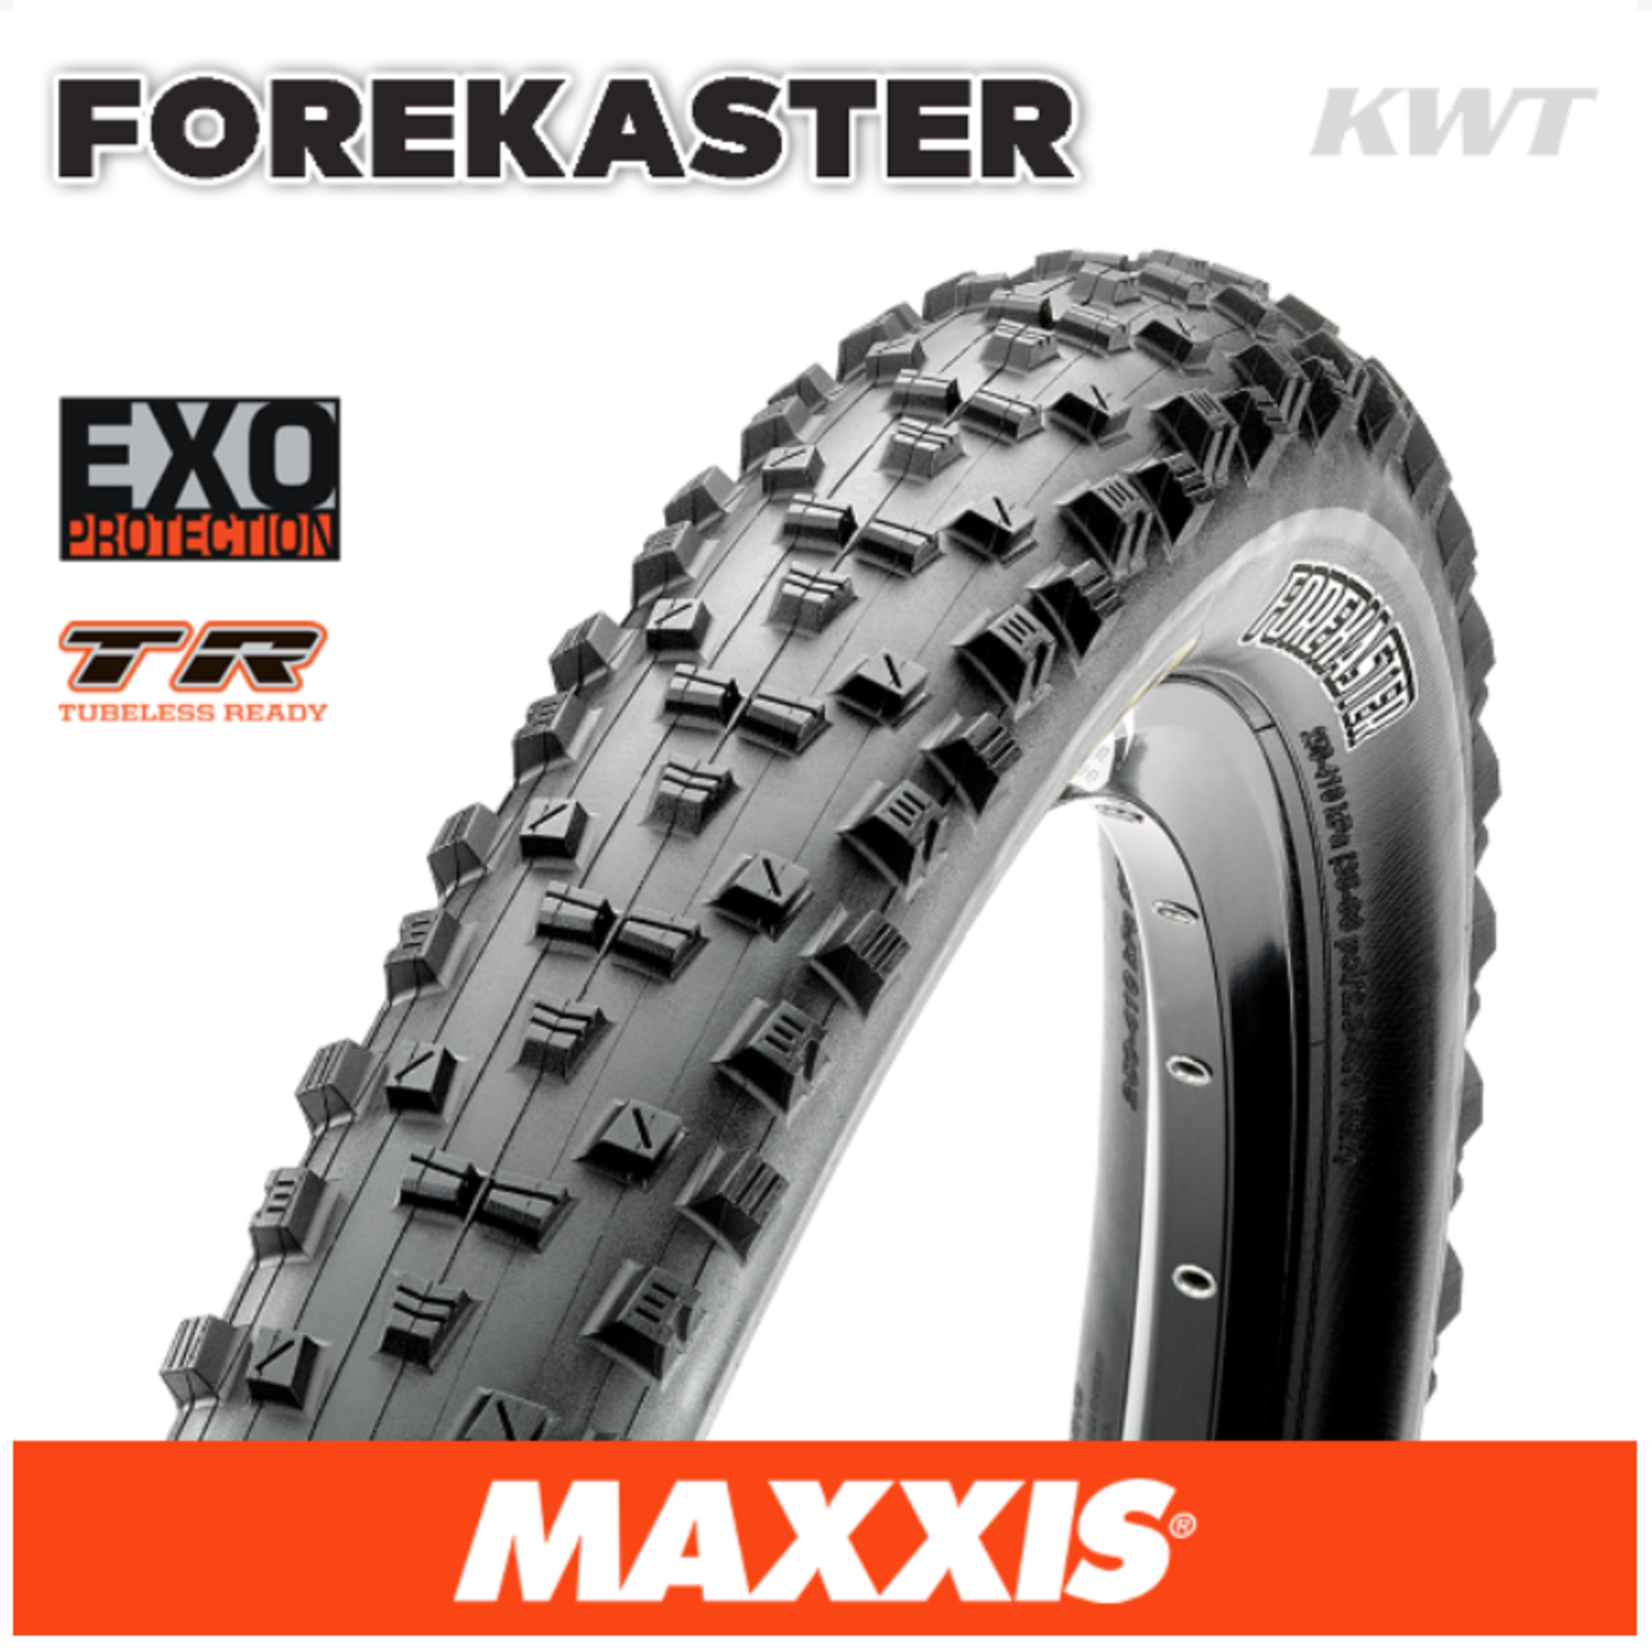 MAXXIS FOREKASTER 27.5 X 2.35 EXO TR